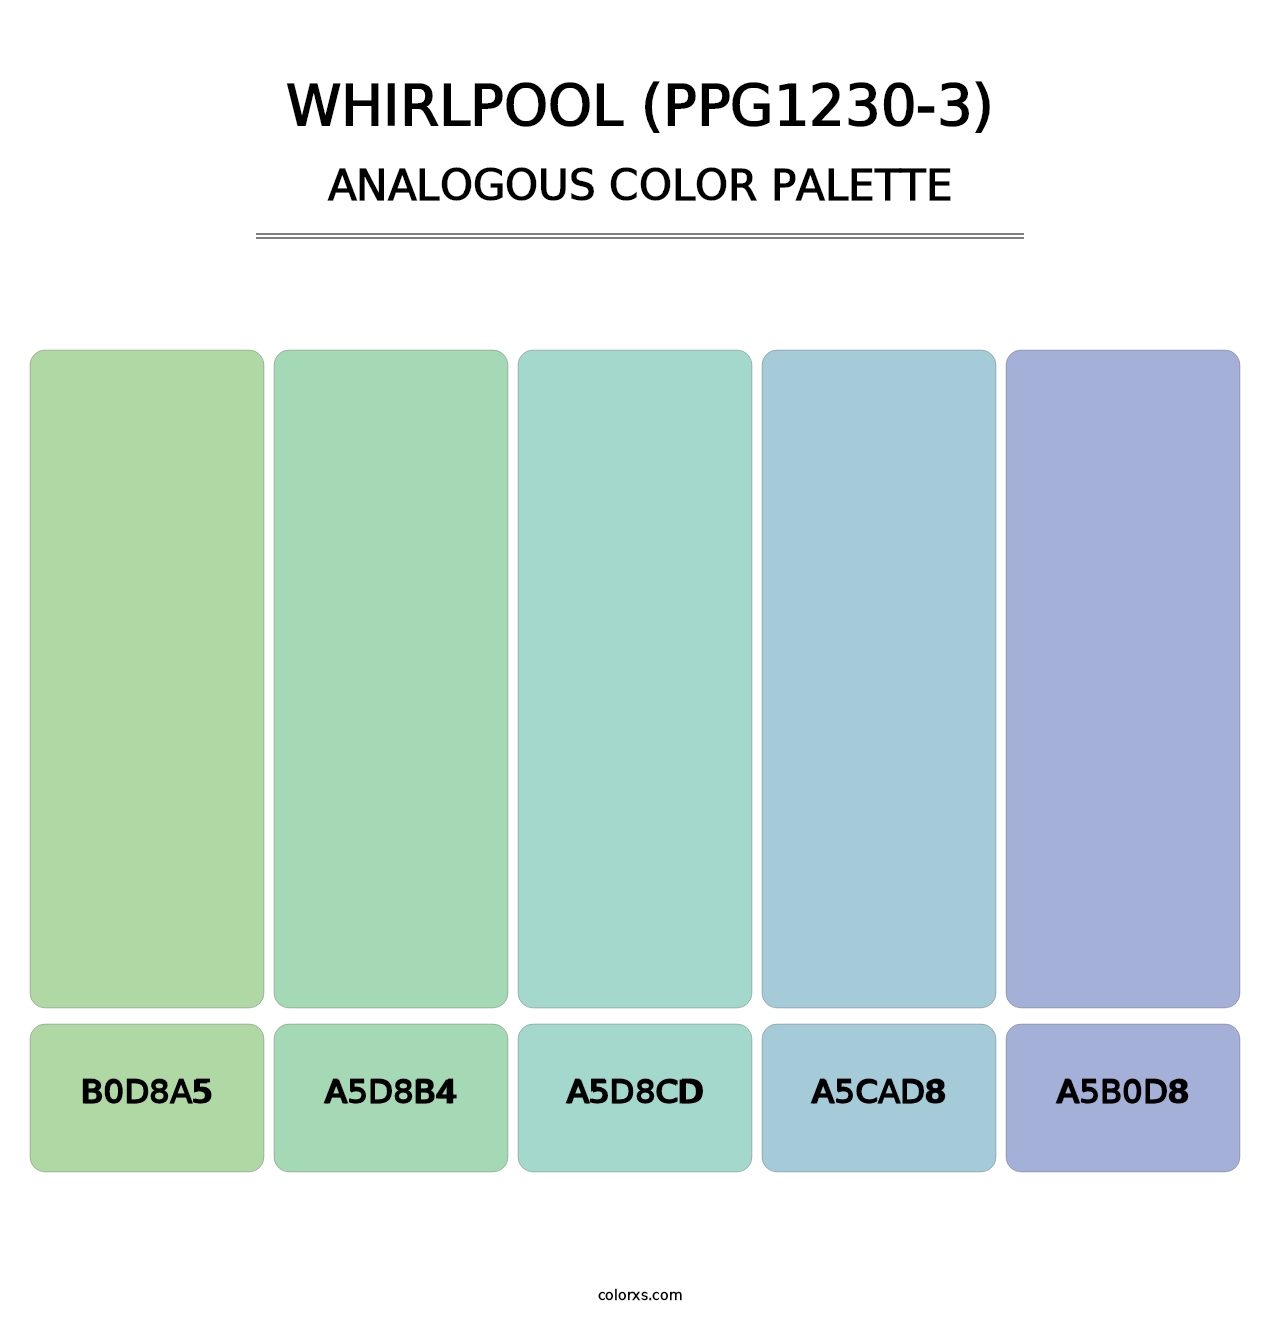 Whirlpool (PPG1230-3) - Analogous Color Palette